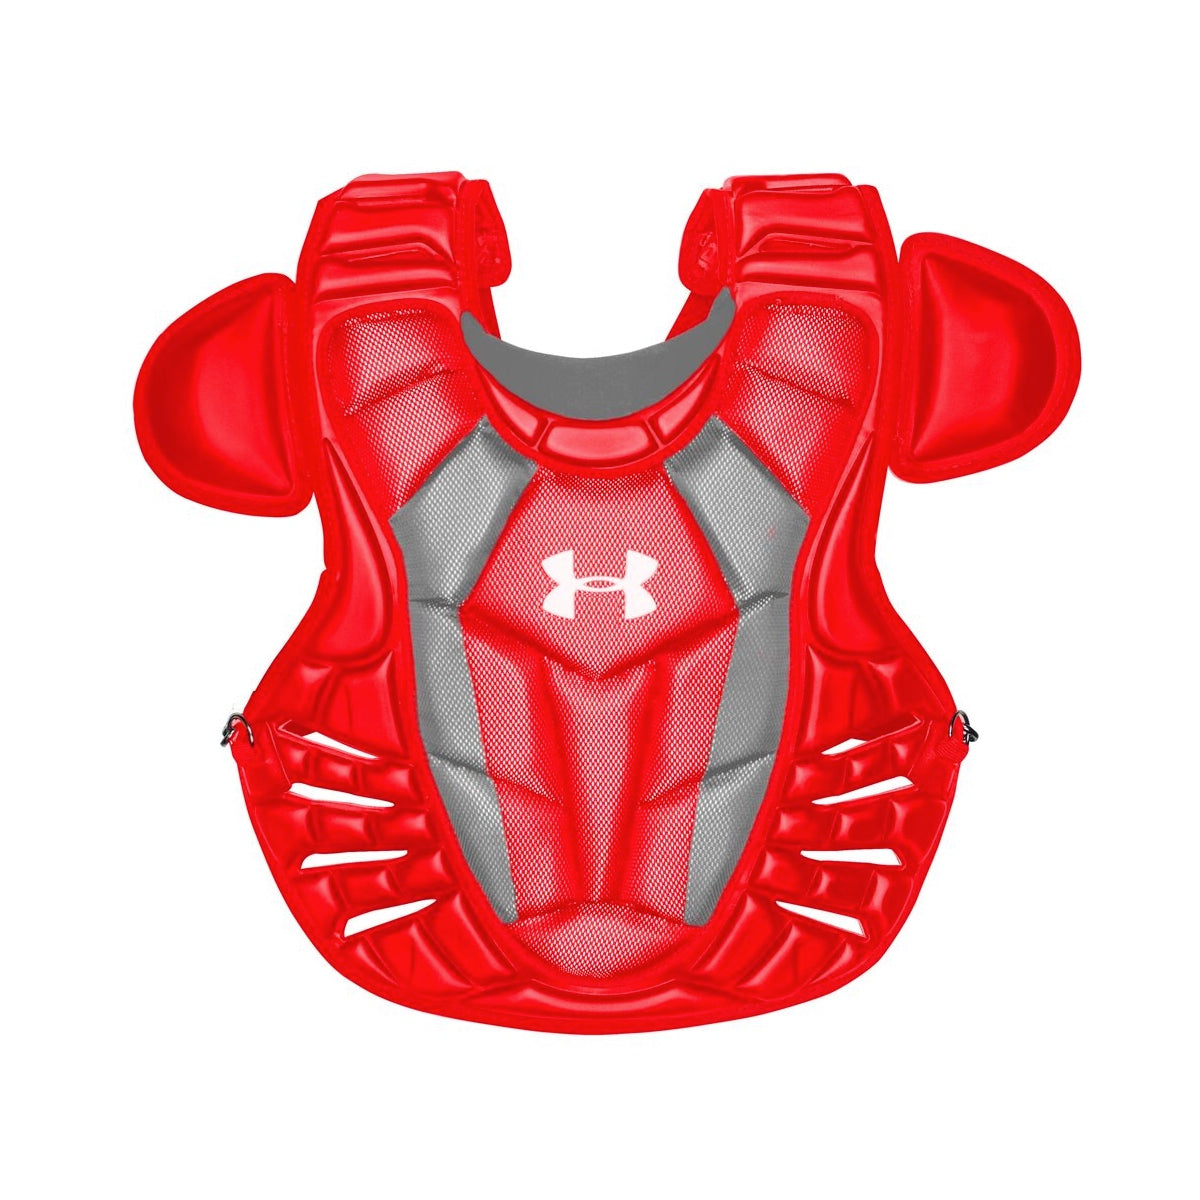 under-armour-converge-uacp3-srp-chest-protector